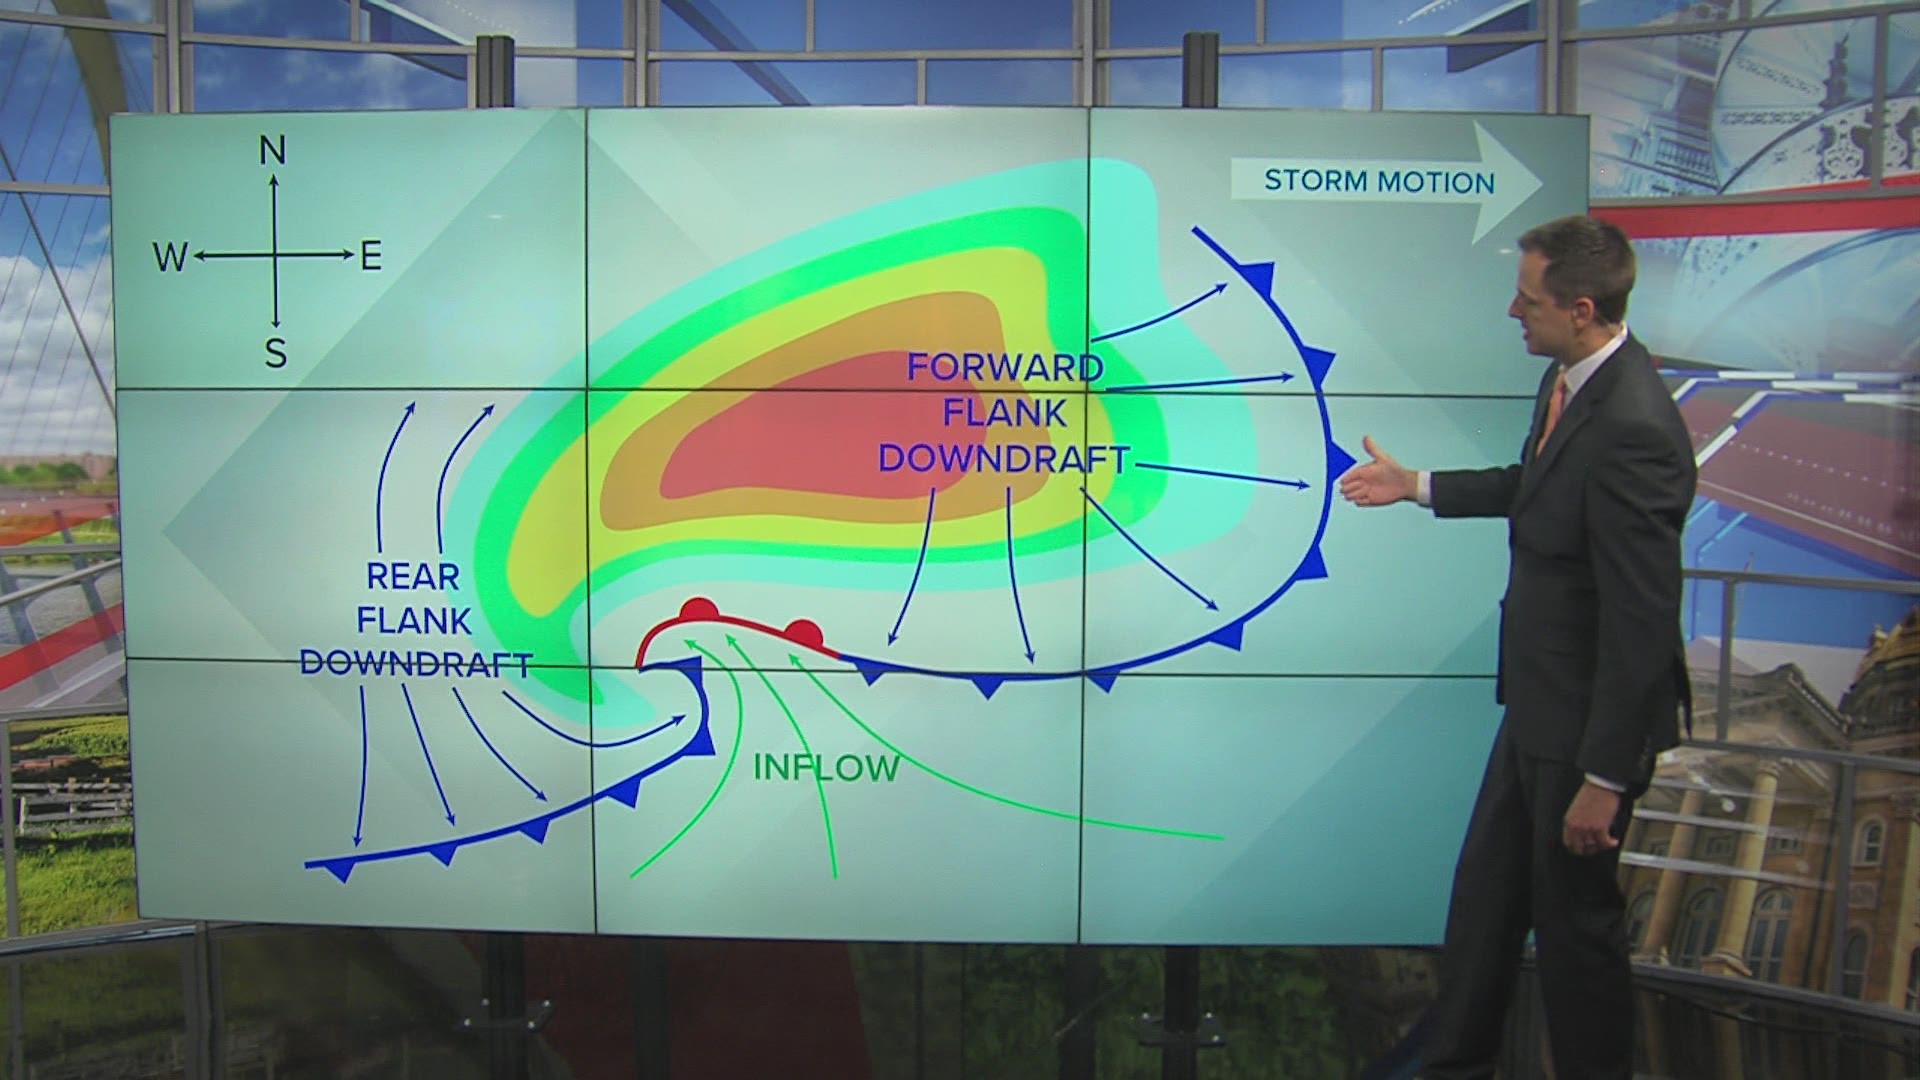 There are numerous aspects of a supercell that make it different from typical thunderstorms.